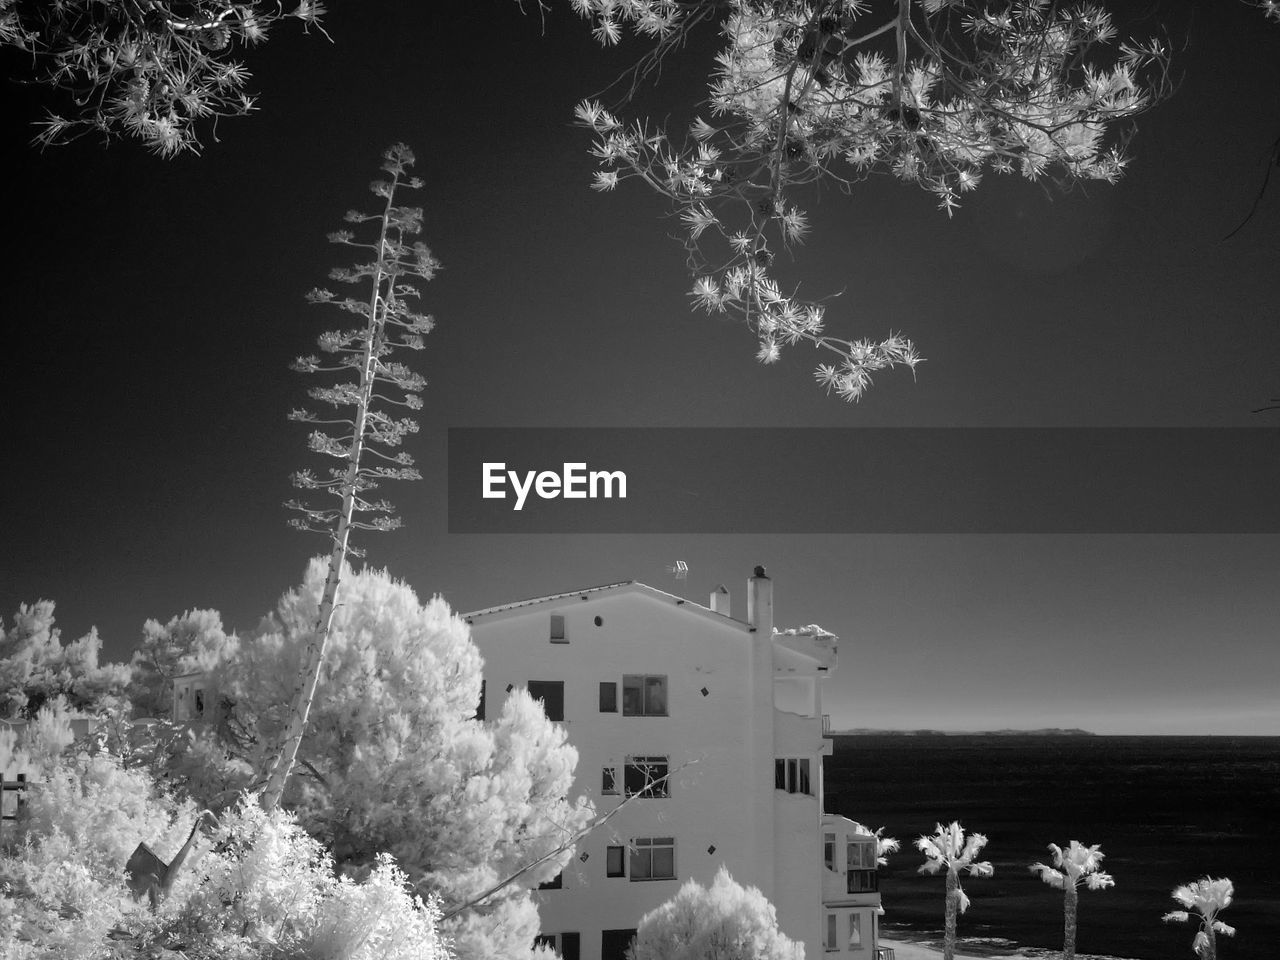 Infrared image of trees and building in city